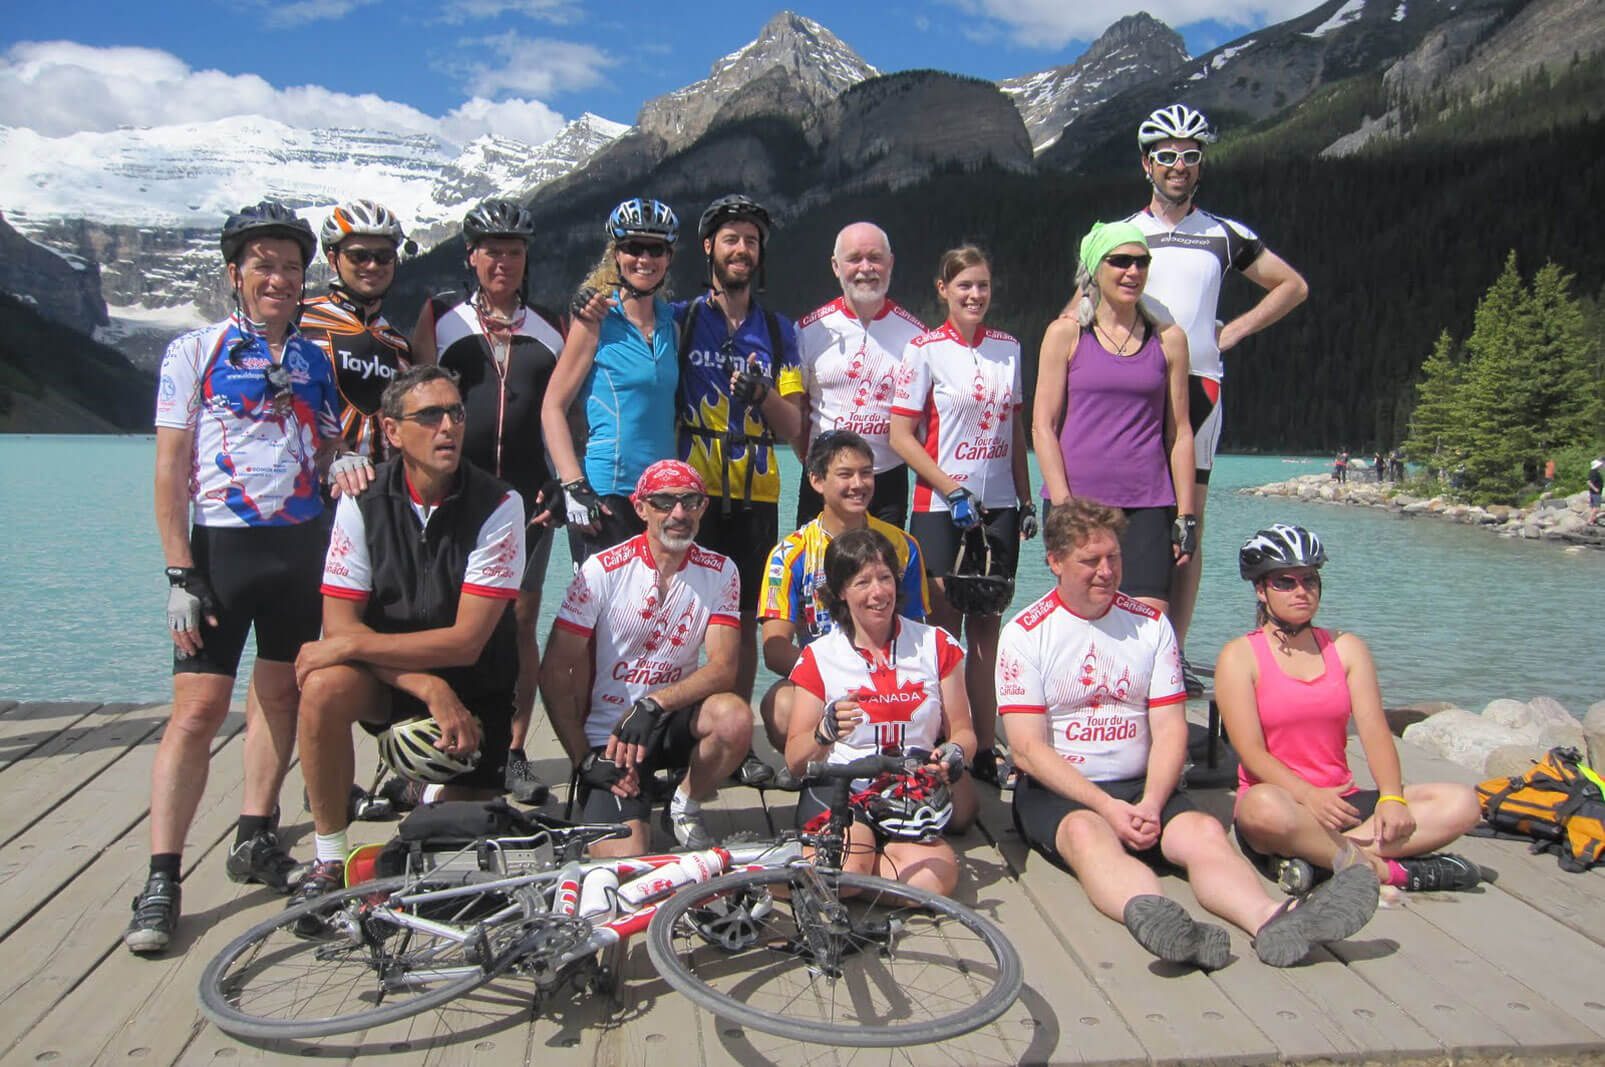 Tour du Canada Cyclists at Lake Louise